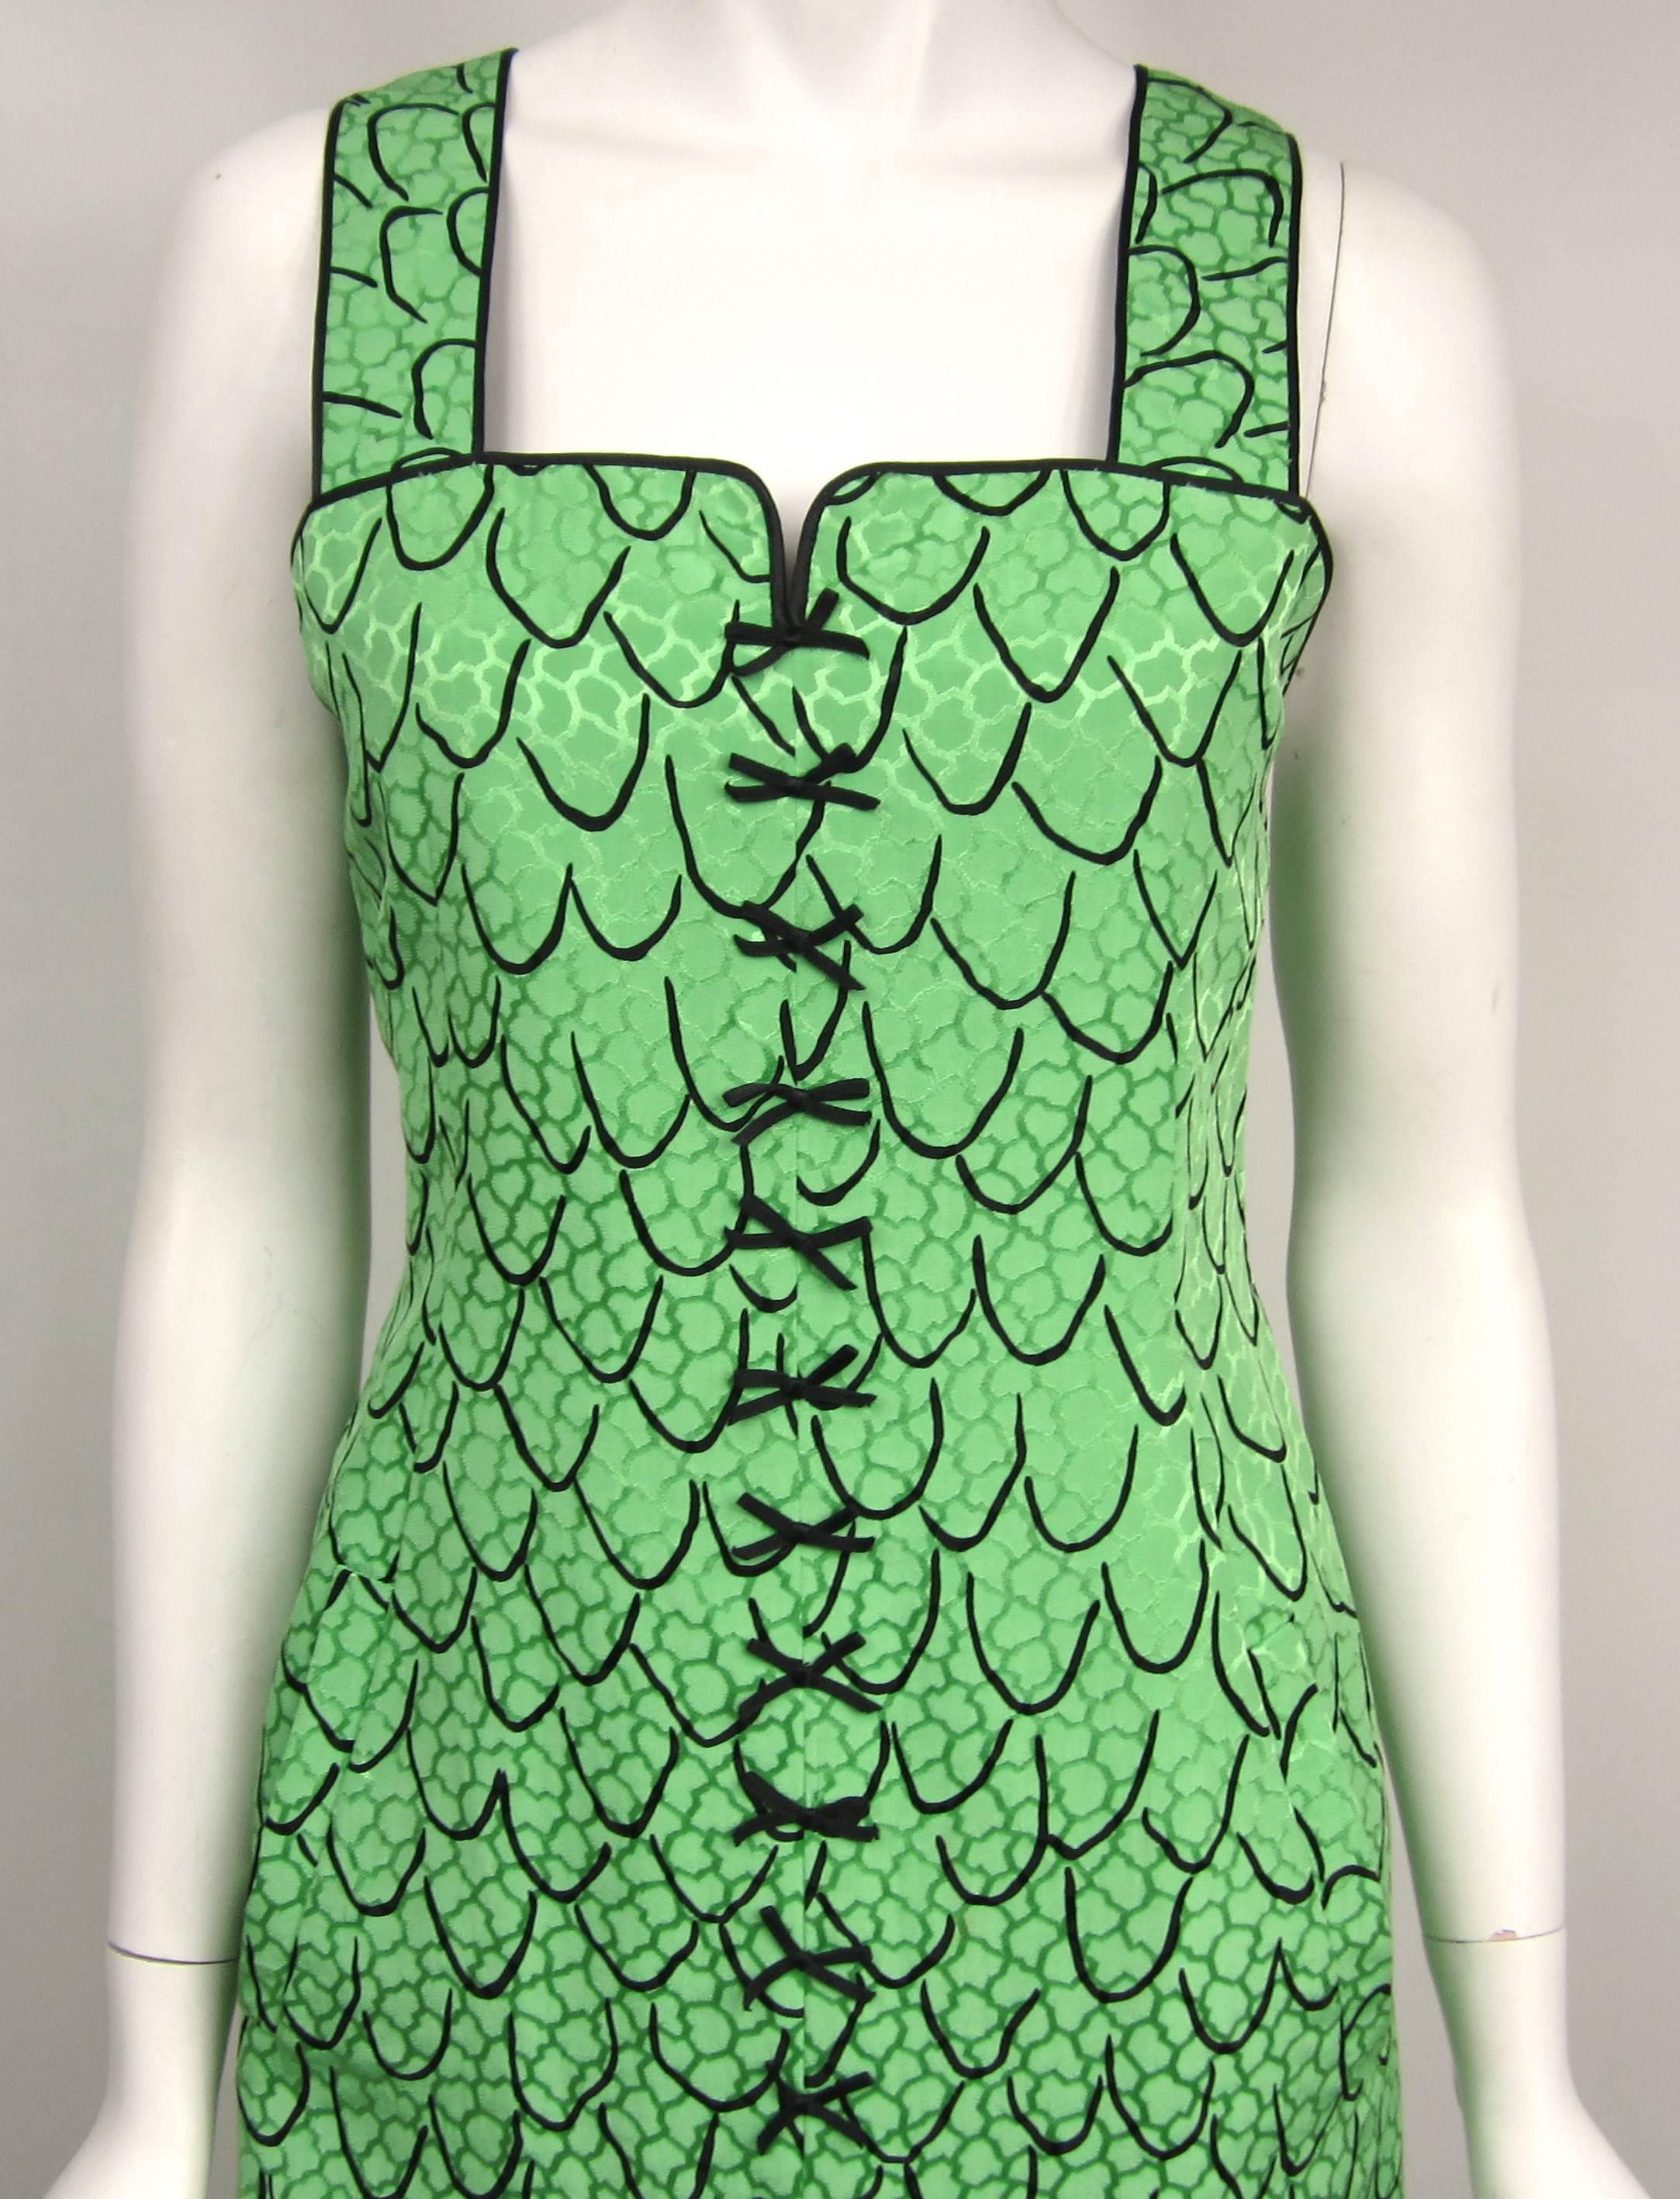 Stunning Green Geoffrey Beene Trompe L'oeil dress. Tags still attached, never worn. Size 4. Measurements are Up to 34-inch chest --- Up to 30-inch waist --- Up to 37-inch hips --- Length 41 inches. This is out of a massive collection of New Old